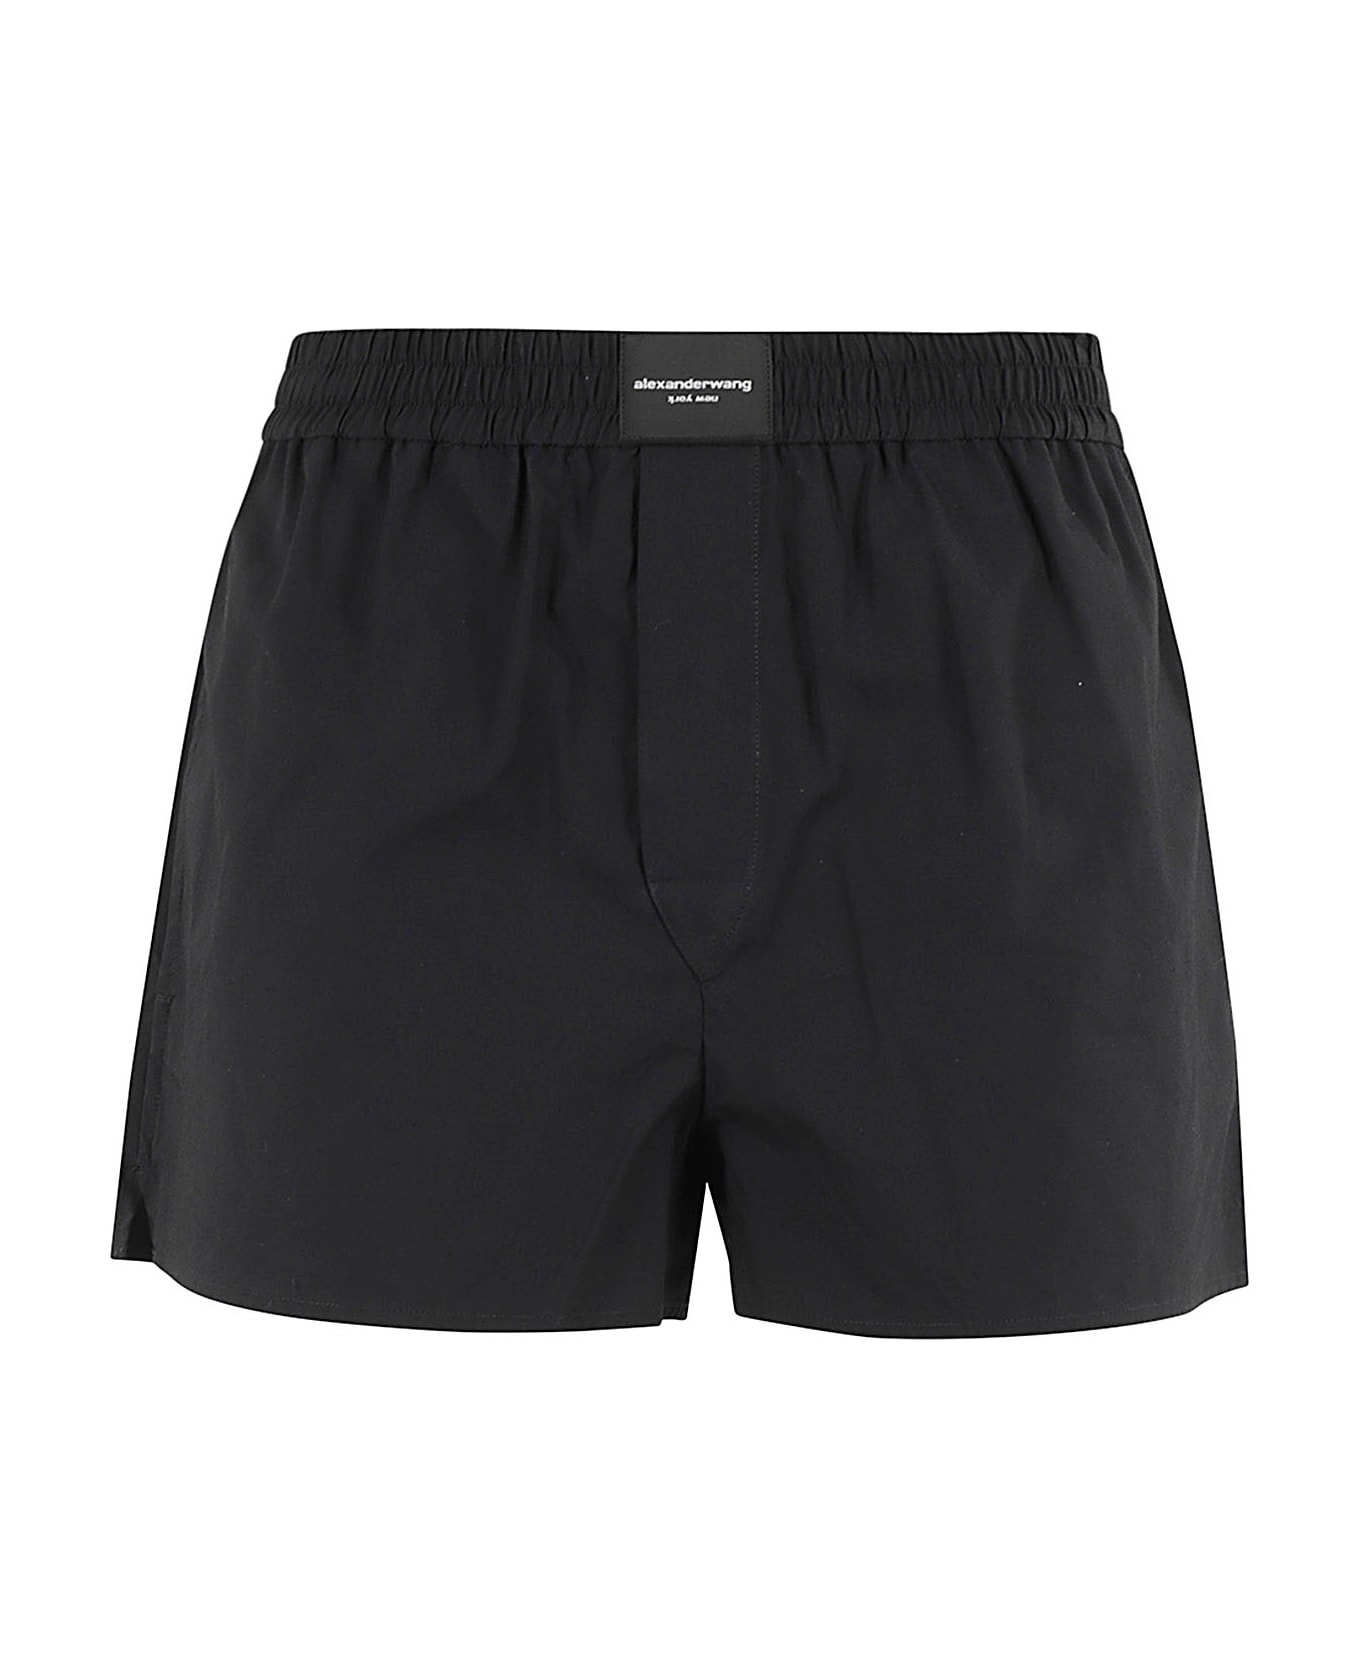 T by Alexander Wang Classic Boxer Short ショートパンツ